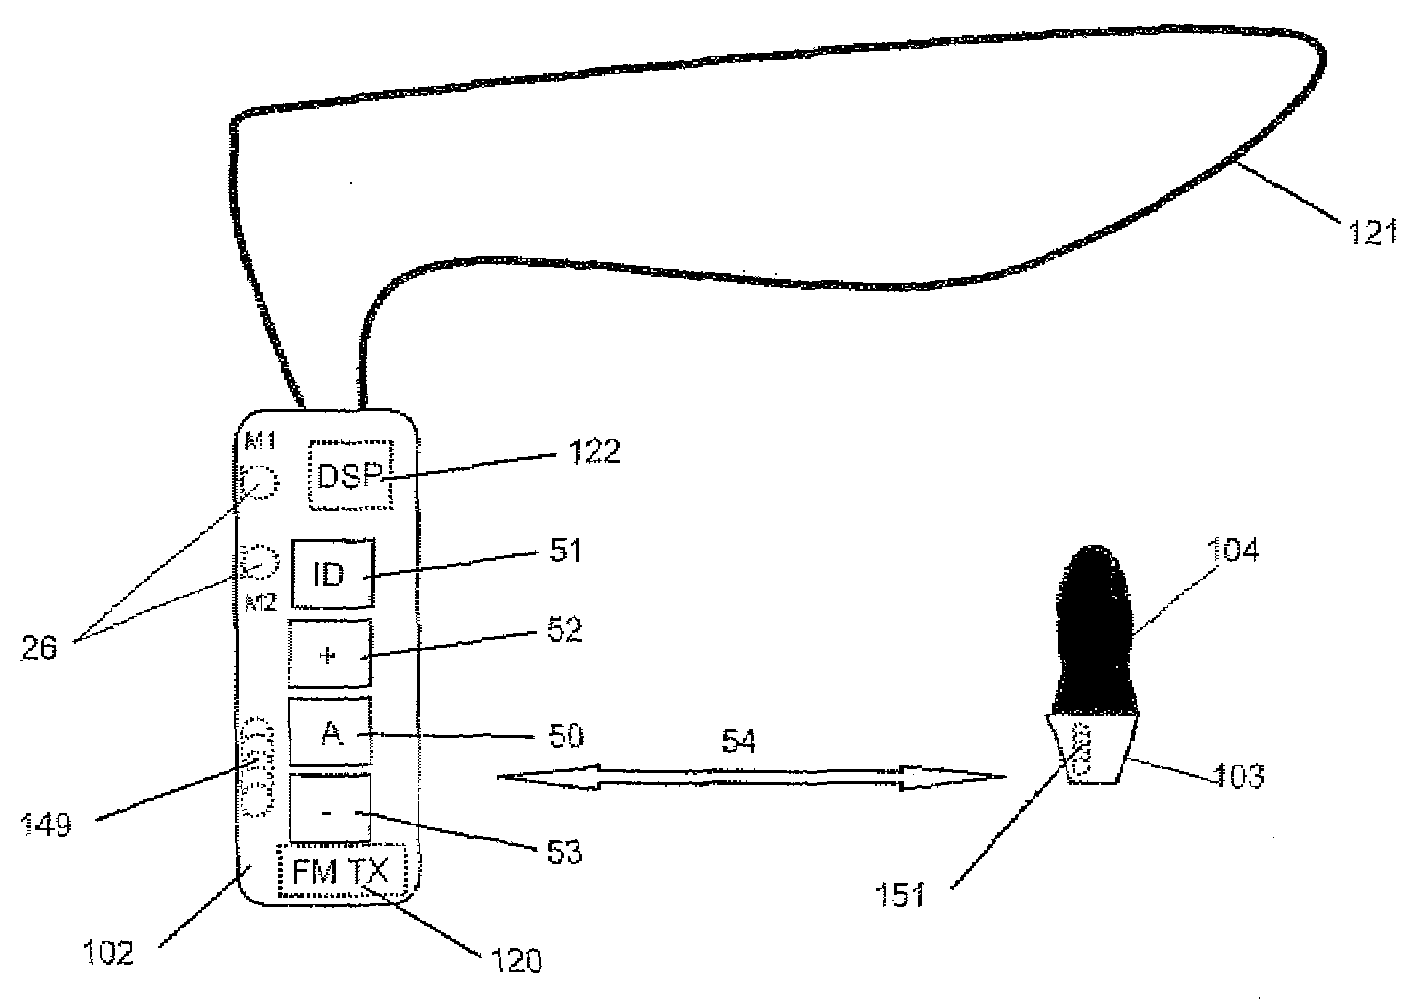 Method for adjusting a system for providing hearing assistance to a user